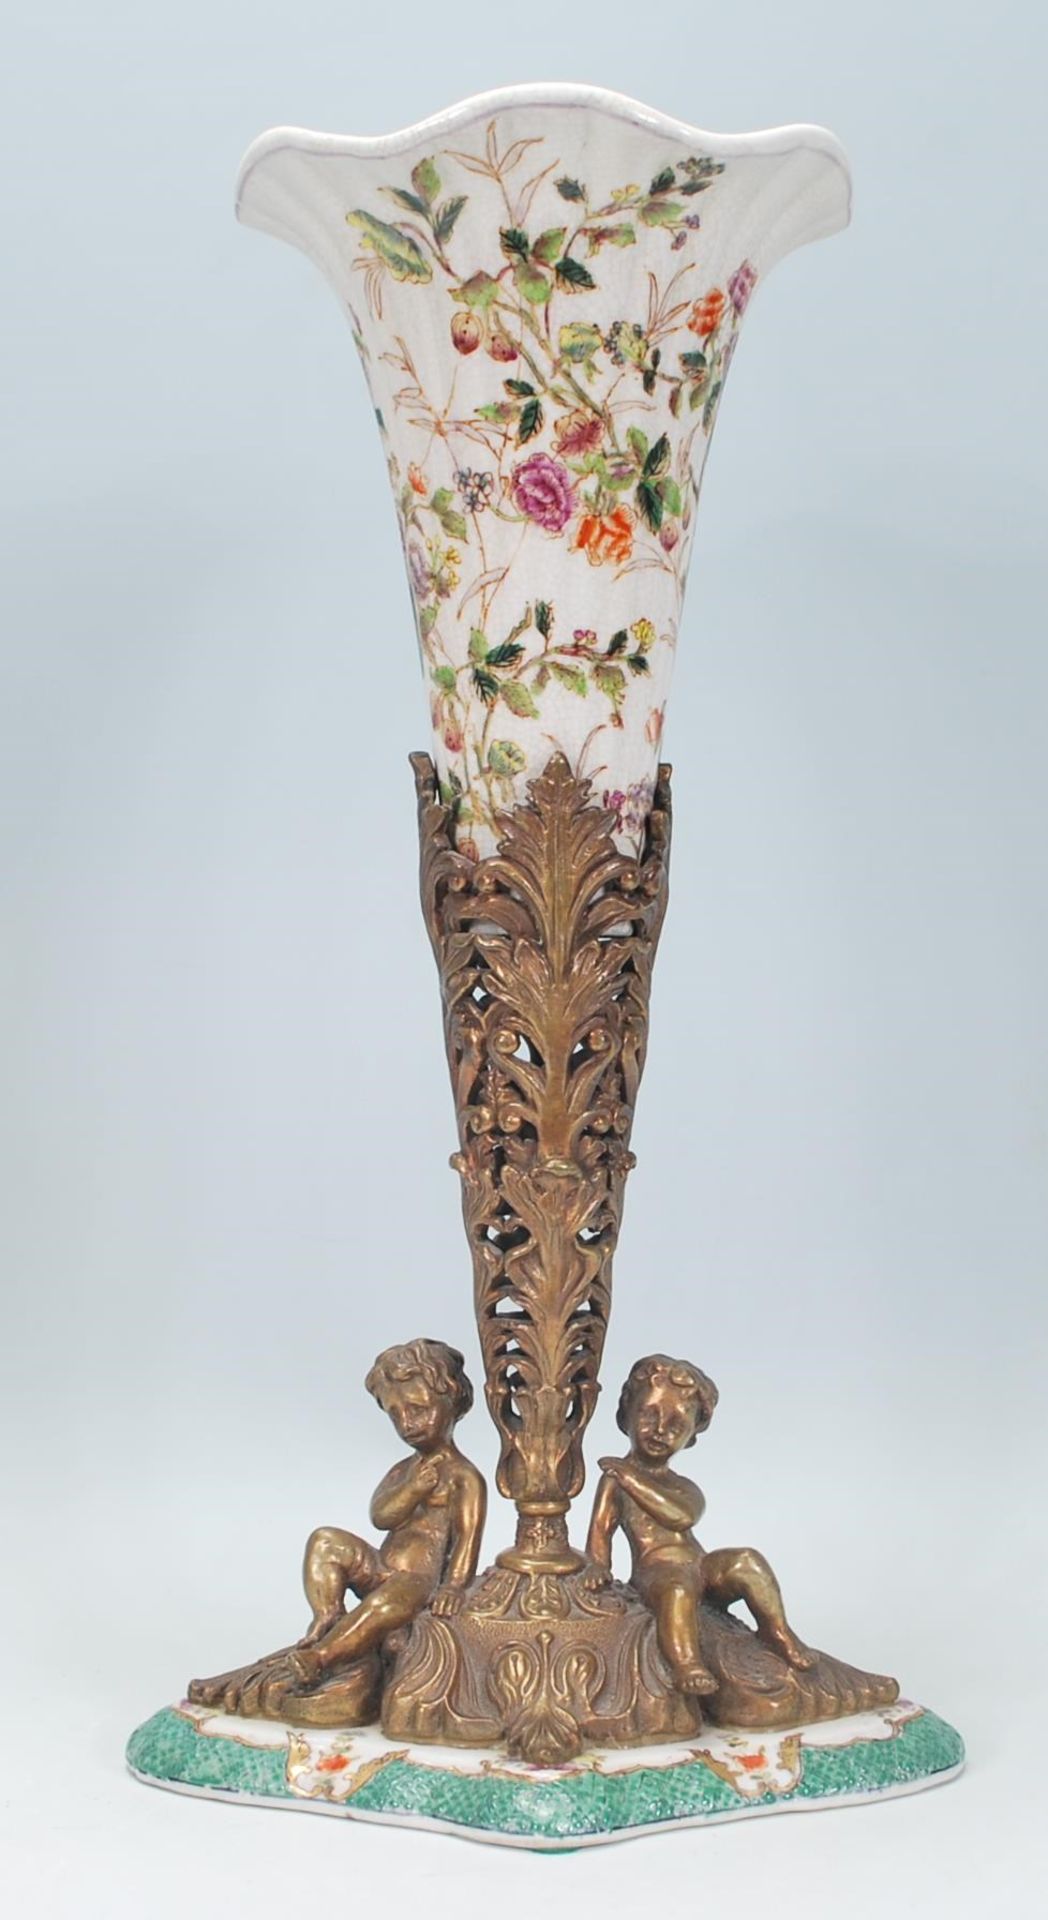 A 20th Century William Lowe centerpiece vase, the vase of tapering form with a fanned rim with